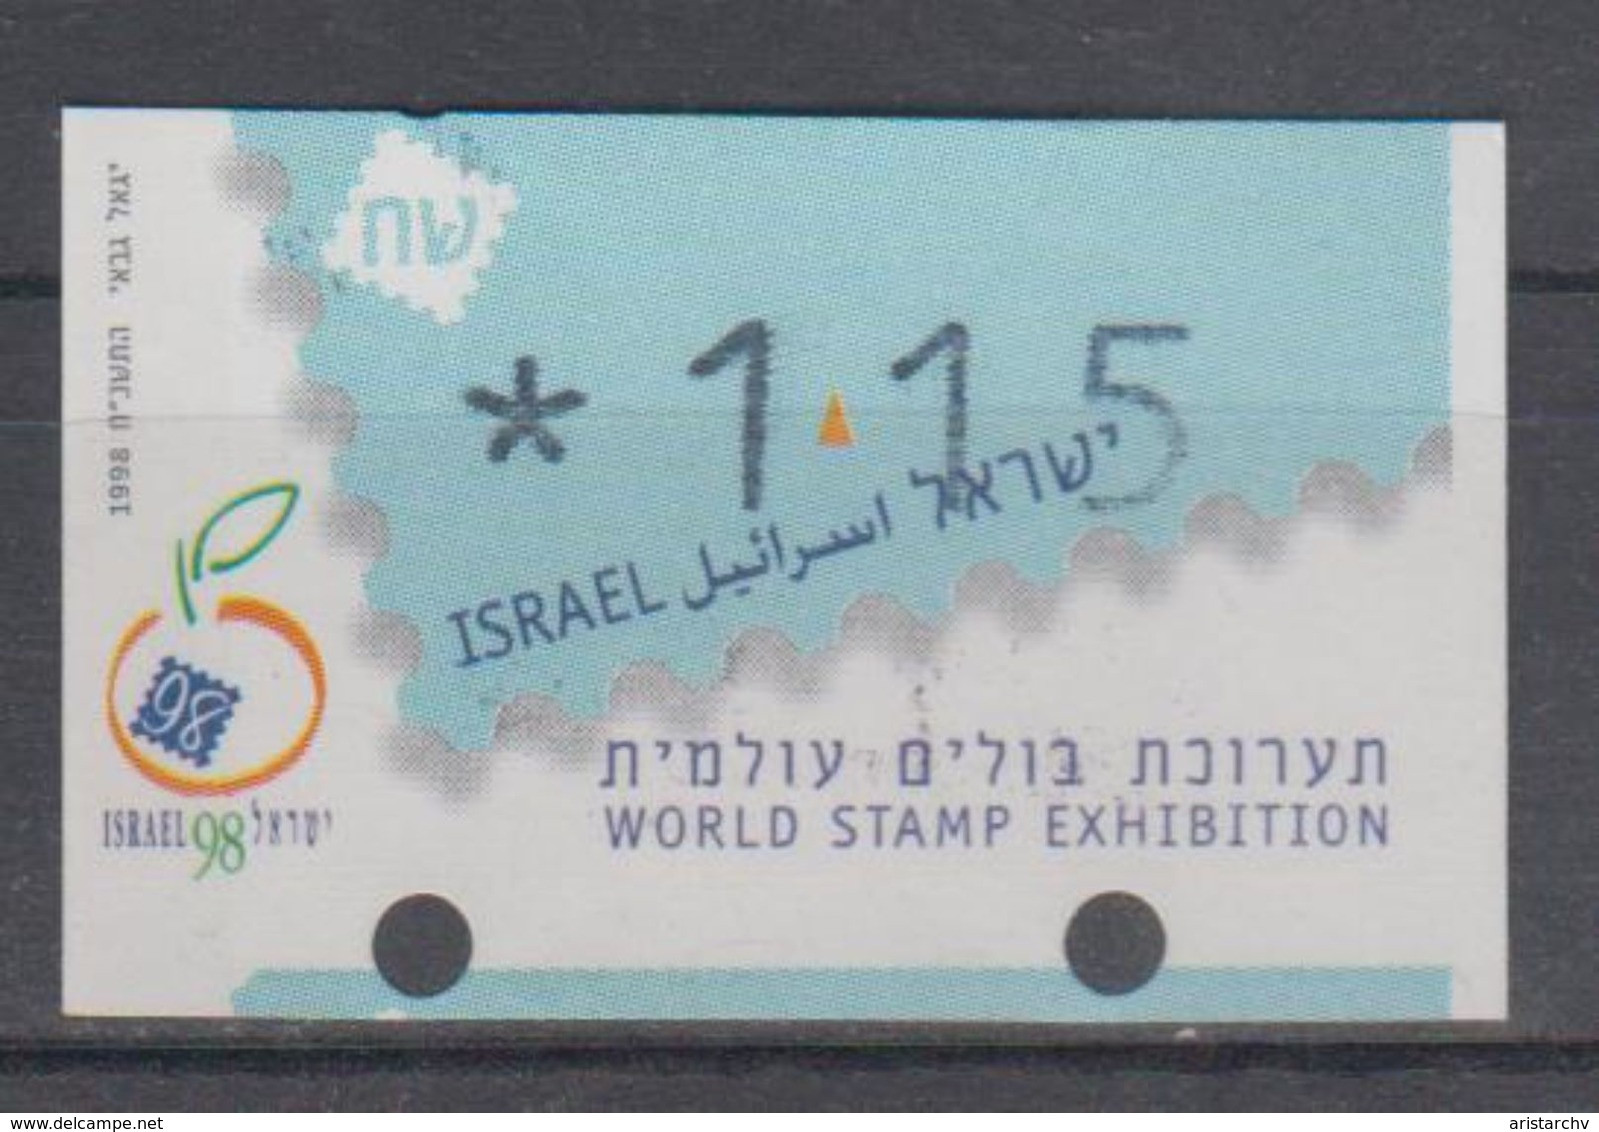 ISRAEL 1998 SIMA ATM WORLD STAMP EXHIBITION TEL AVIV YAFO ERROR 1.15 SHEKELS WITH MOVED PERFORATION - Imperforates, Proofs & Errors